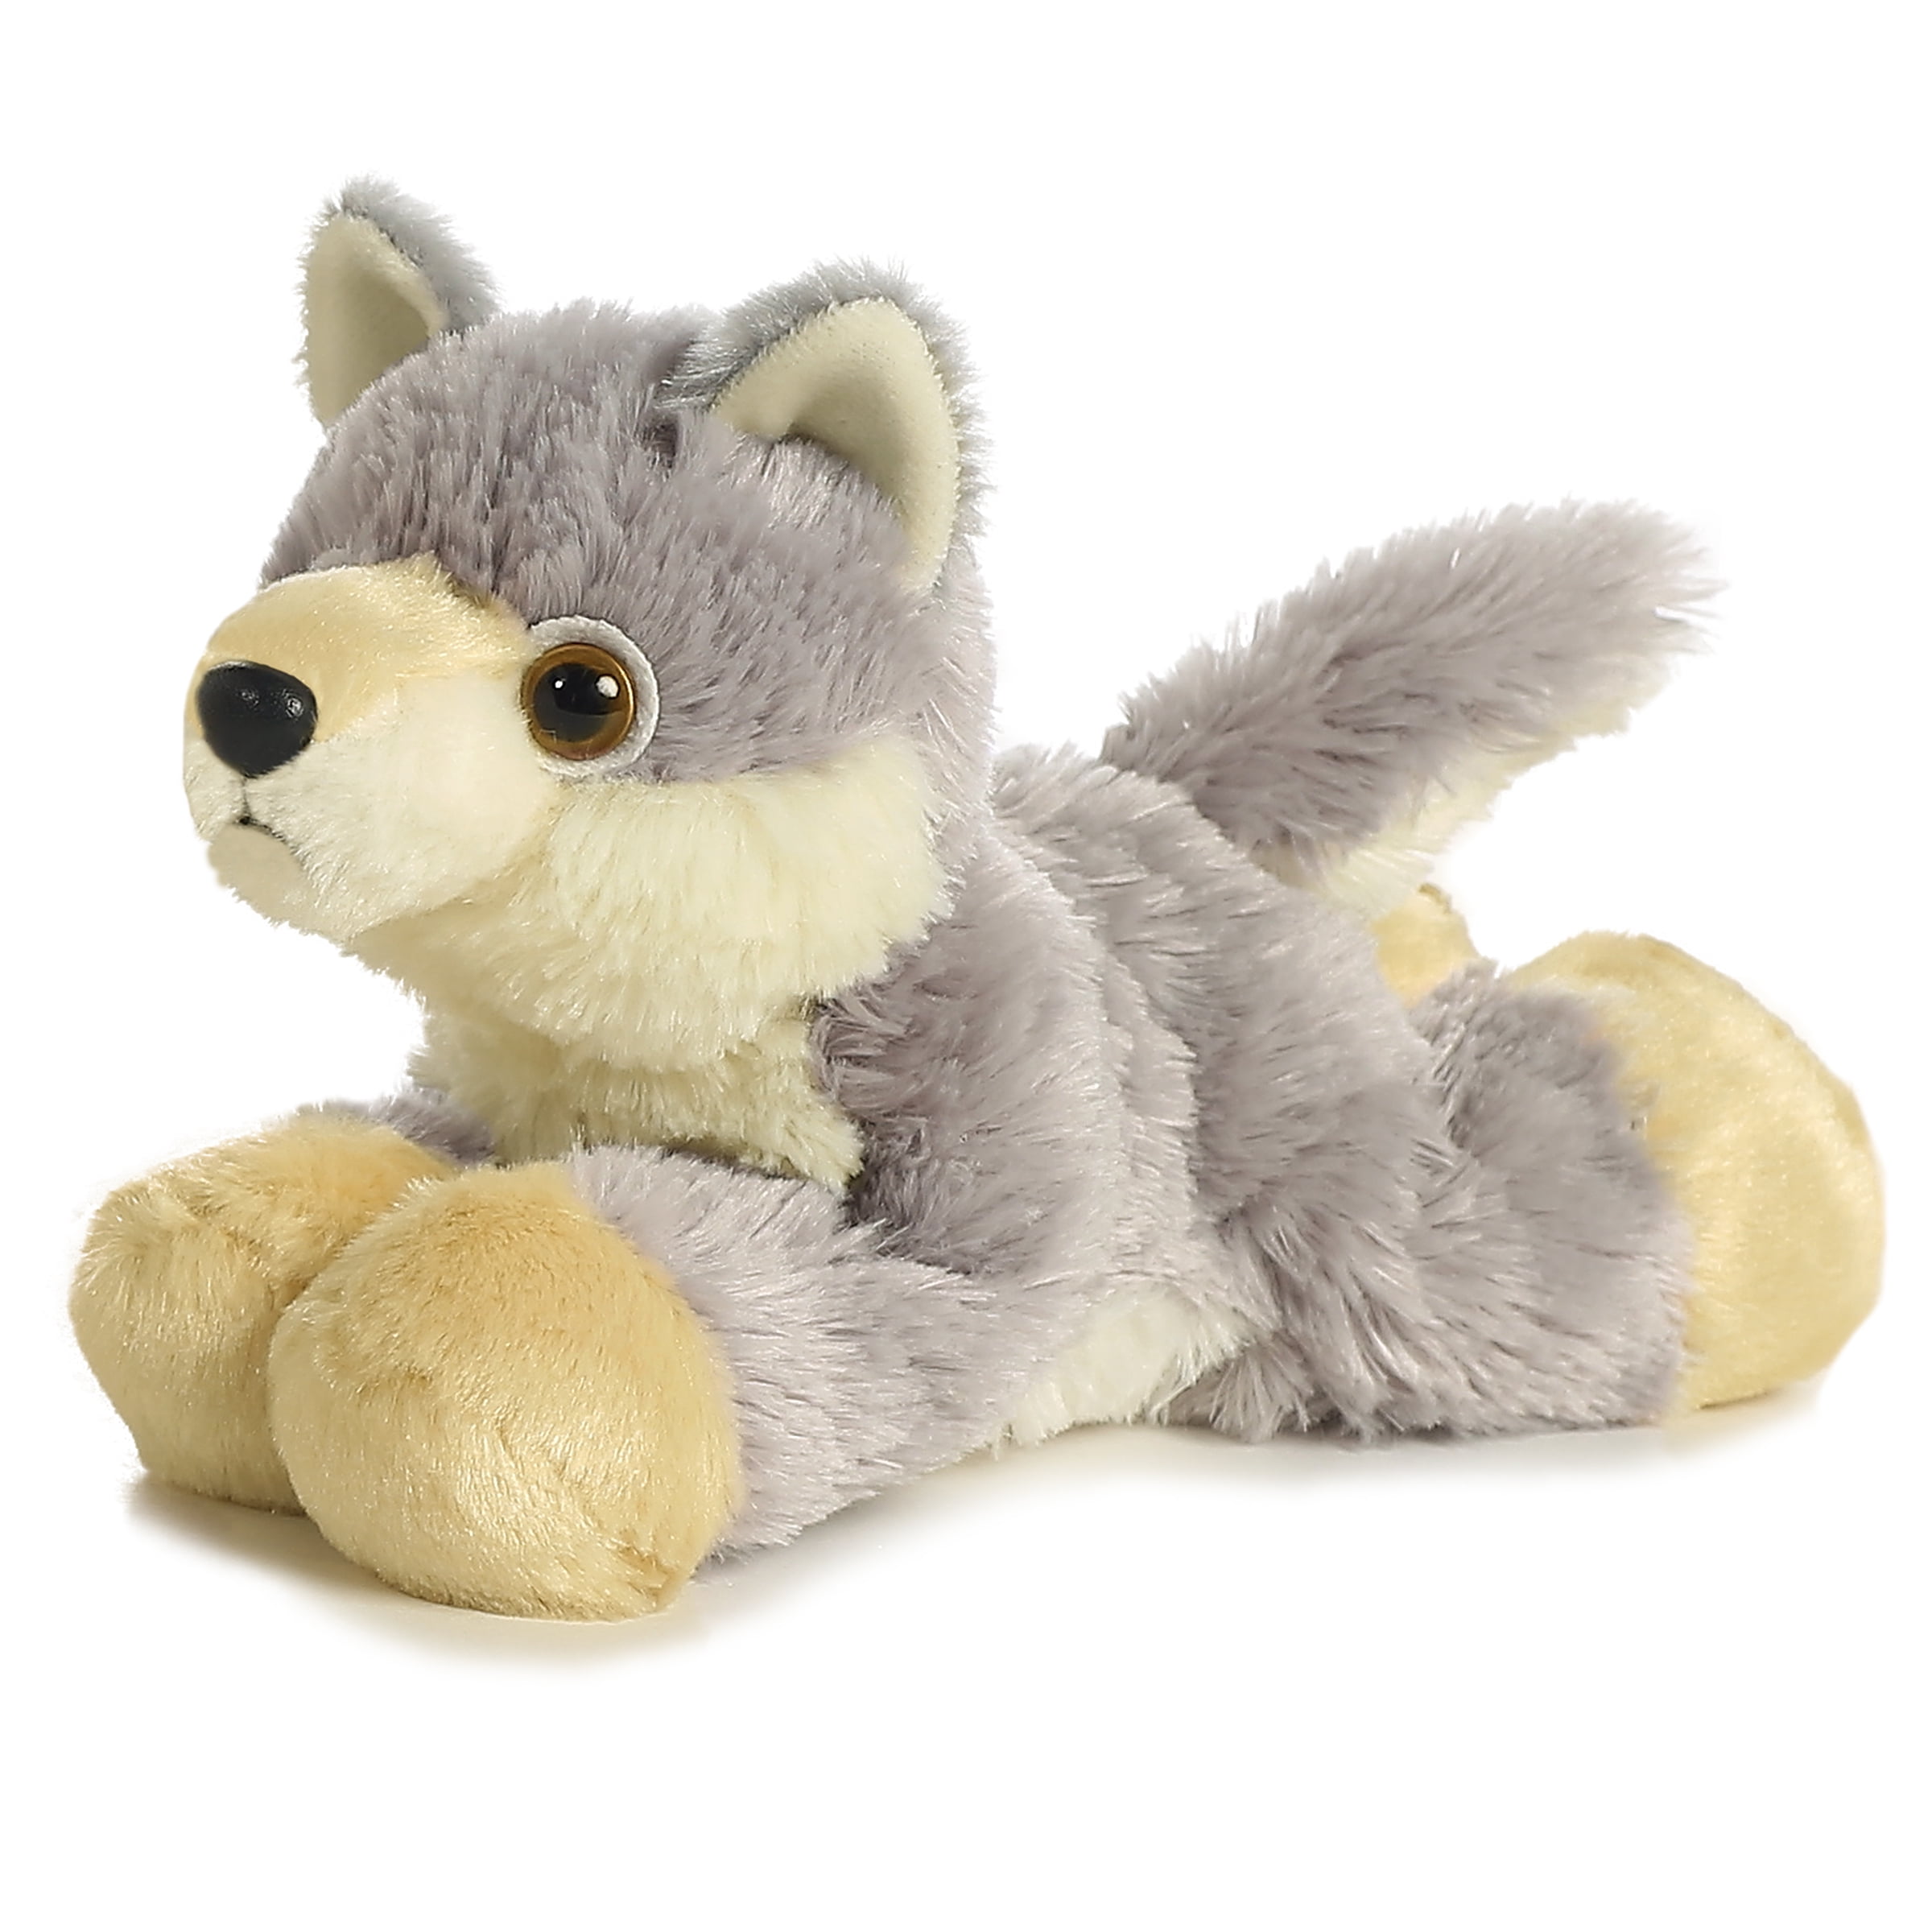 Details about   AURORA 12" WILY WOLF STUFFED ANIMAL DOG HUSKY STANDING PLUSH GREY TAN CUDDLY TOY 